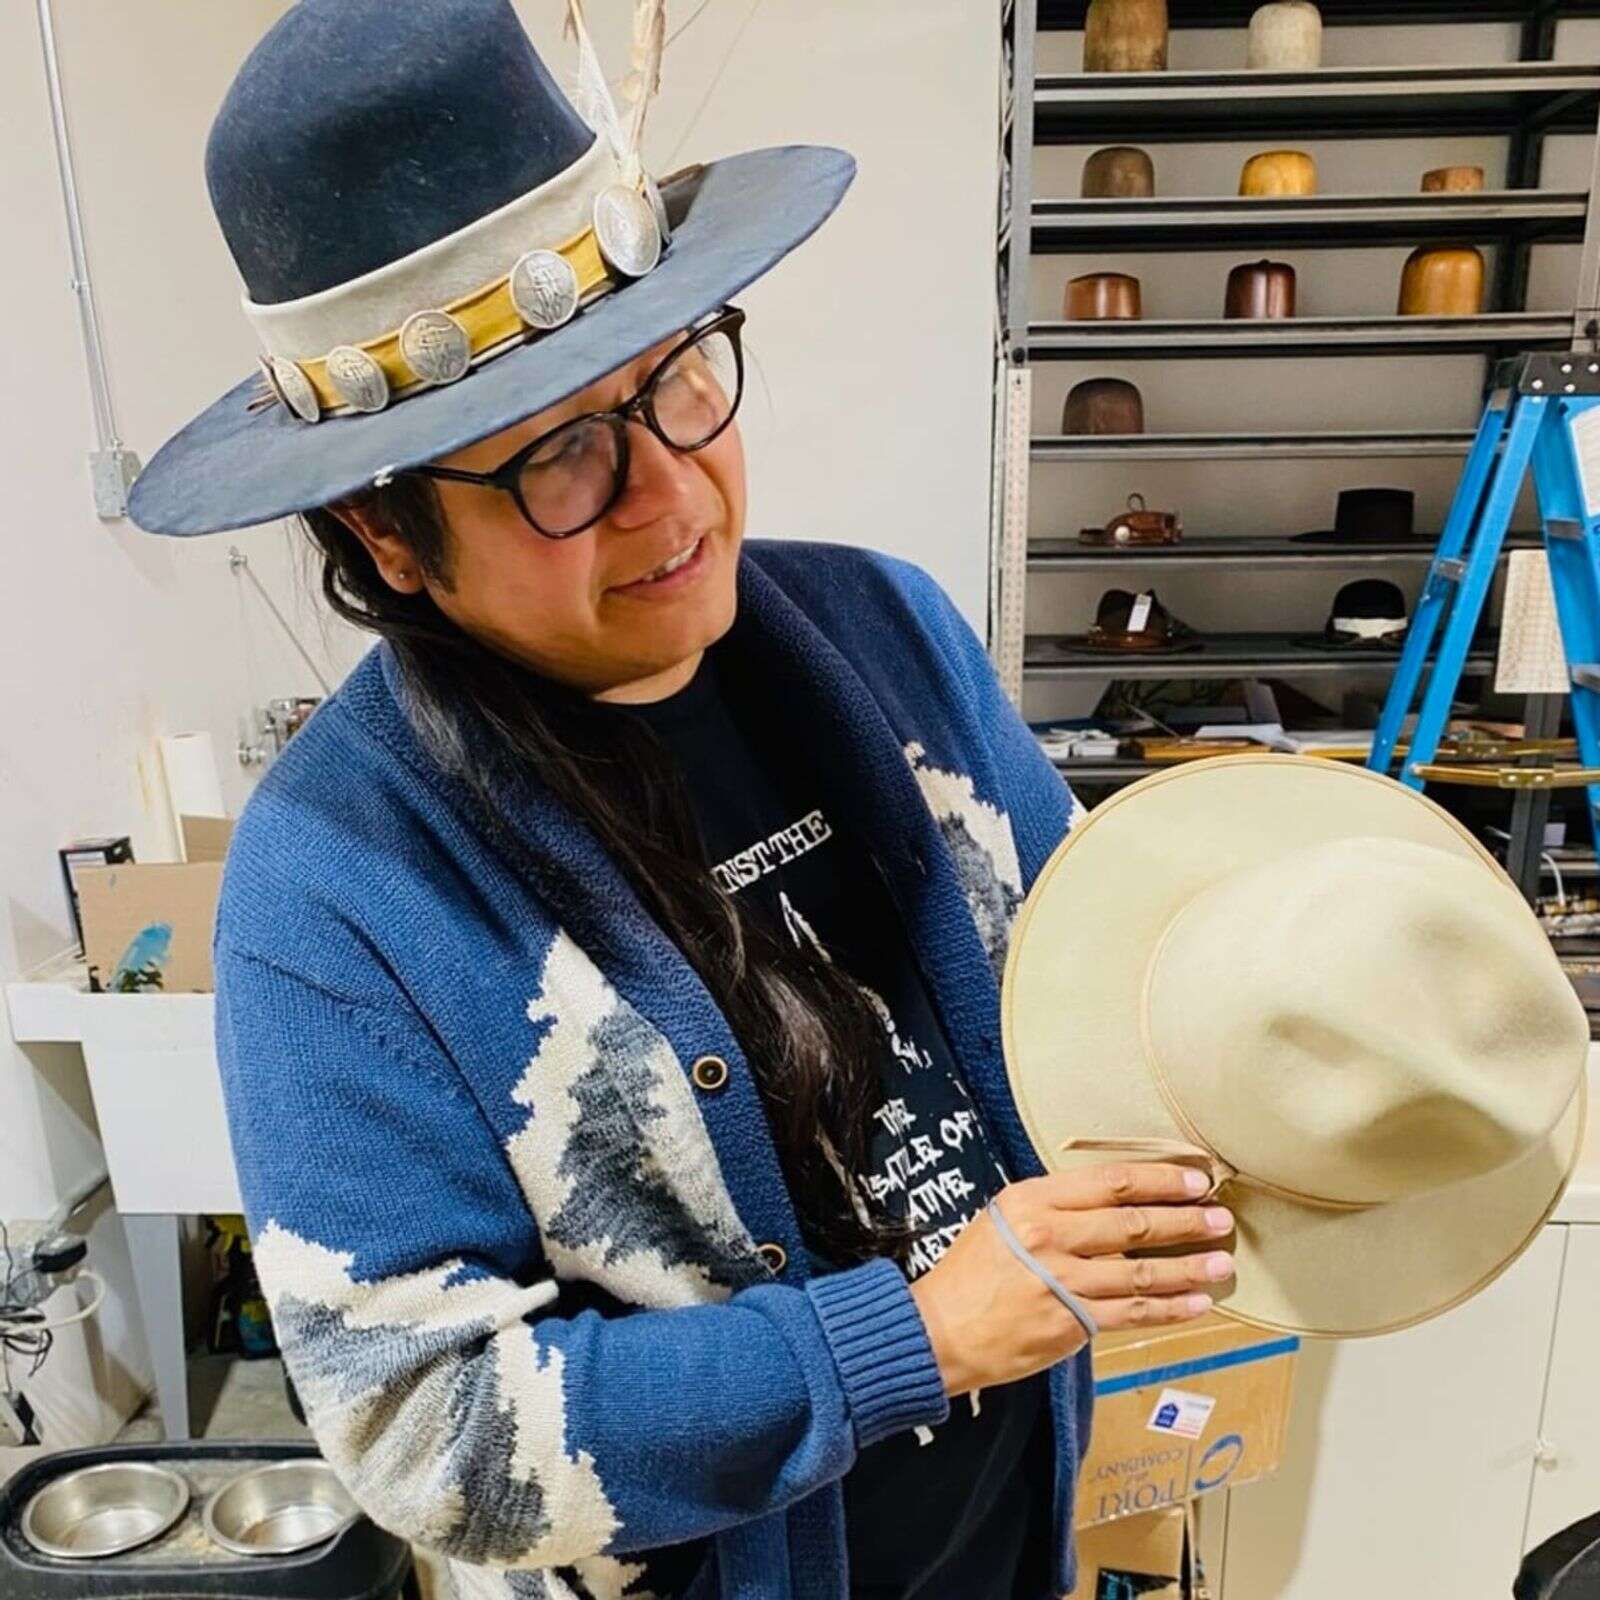 Navajo hatmaker makes waves with classic style – The Tri-City Record